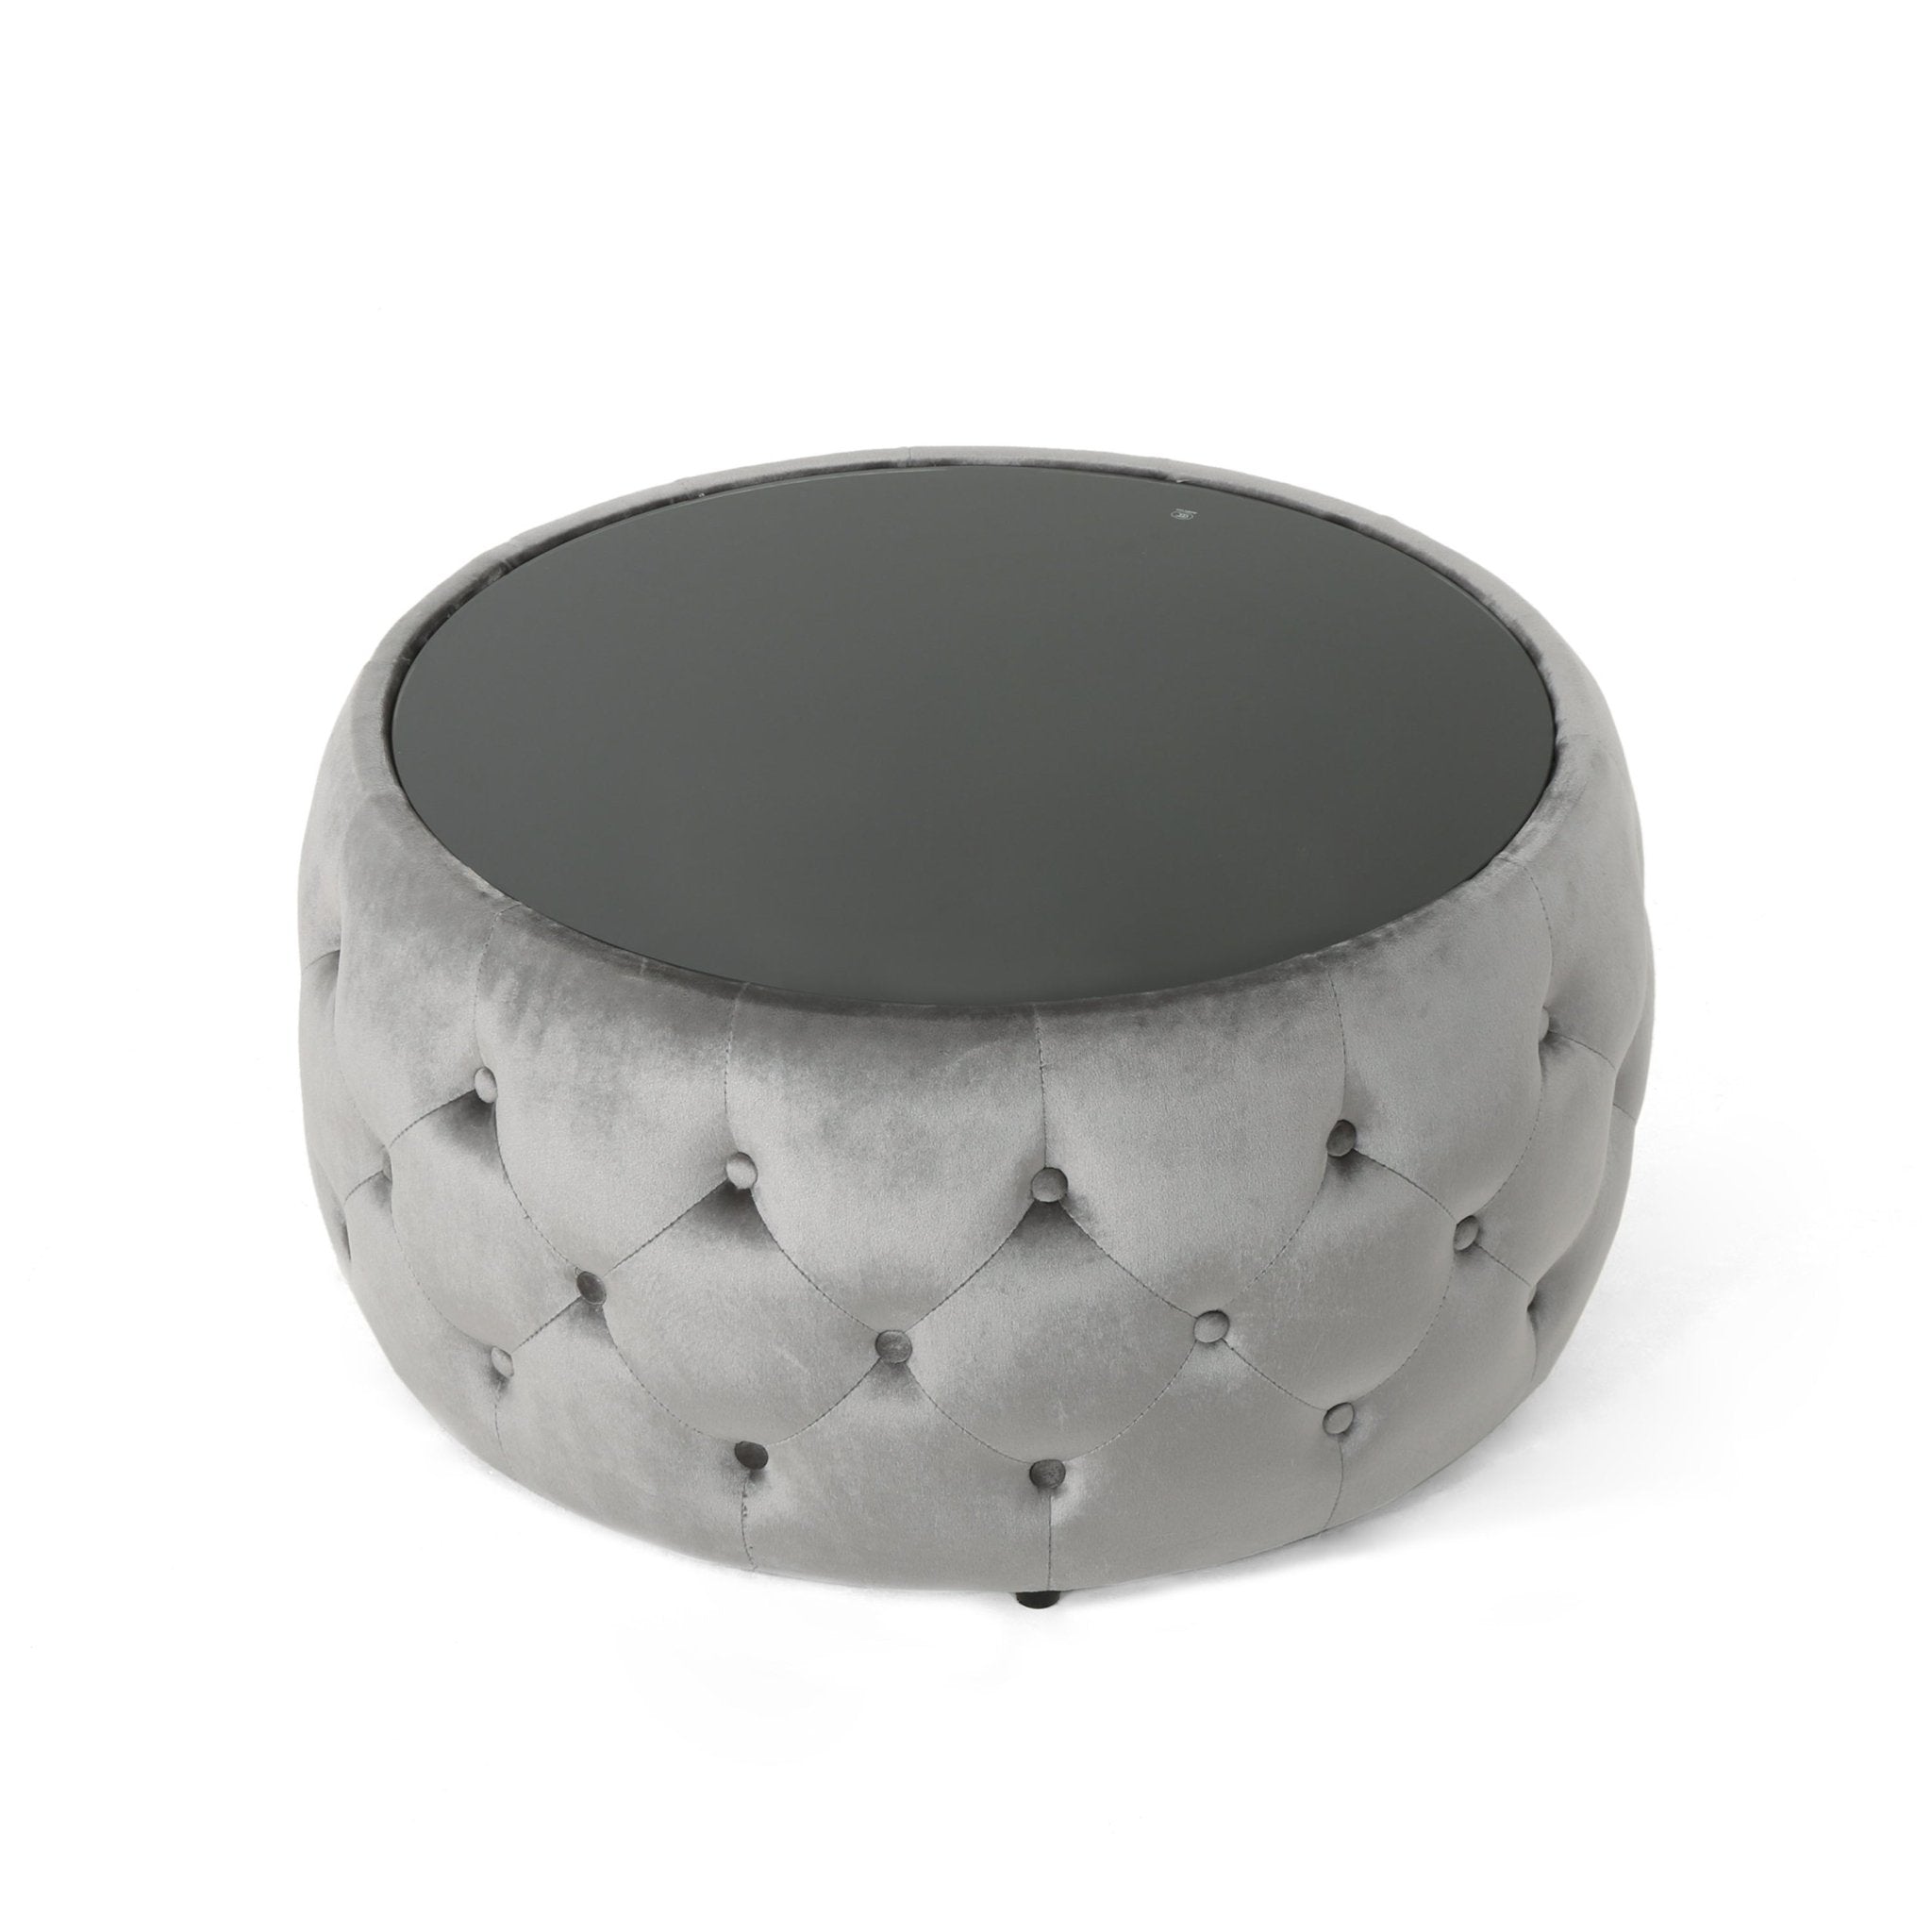 Velvet Upholstered Ottoman with Button Tufted and Tempered Glass Top - Ottomans